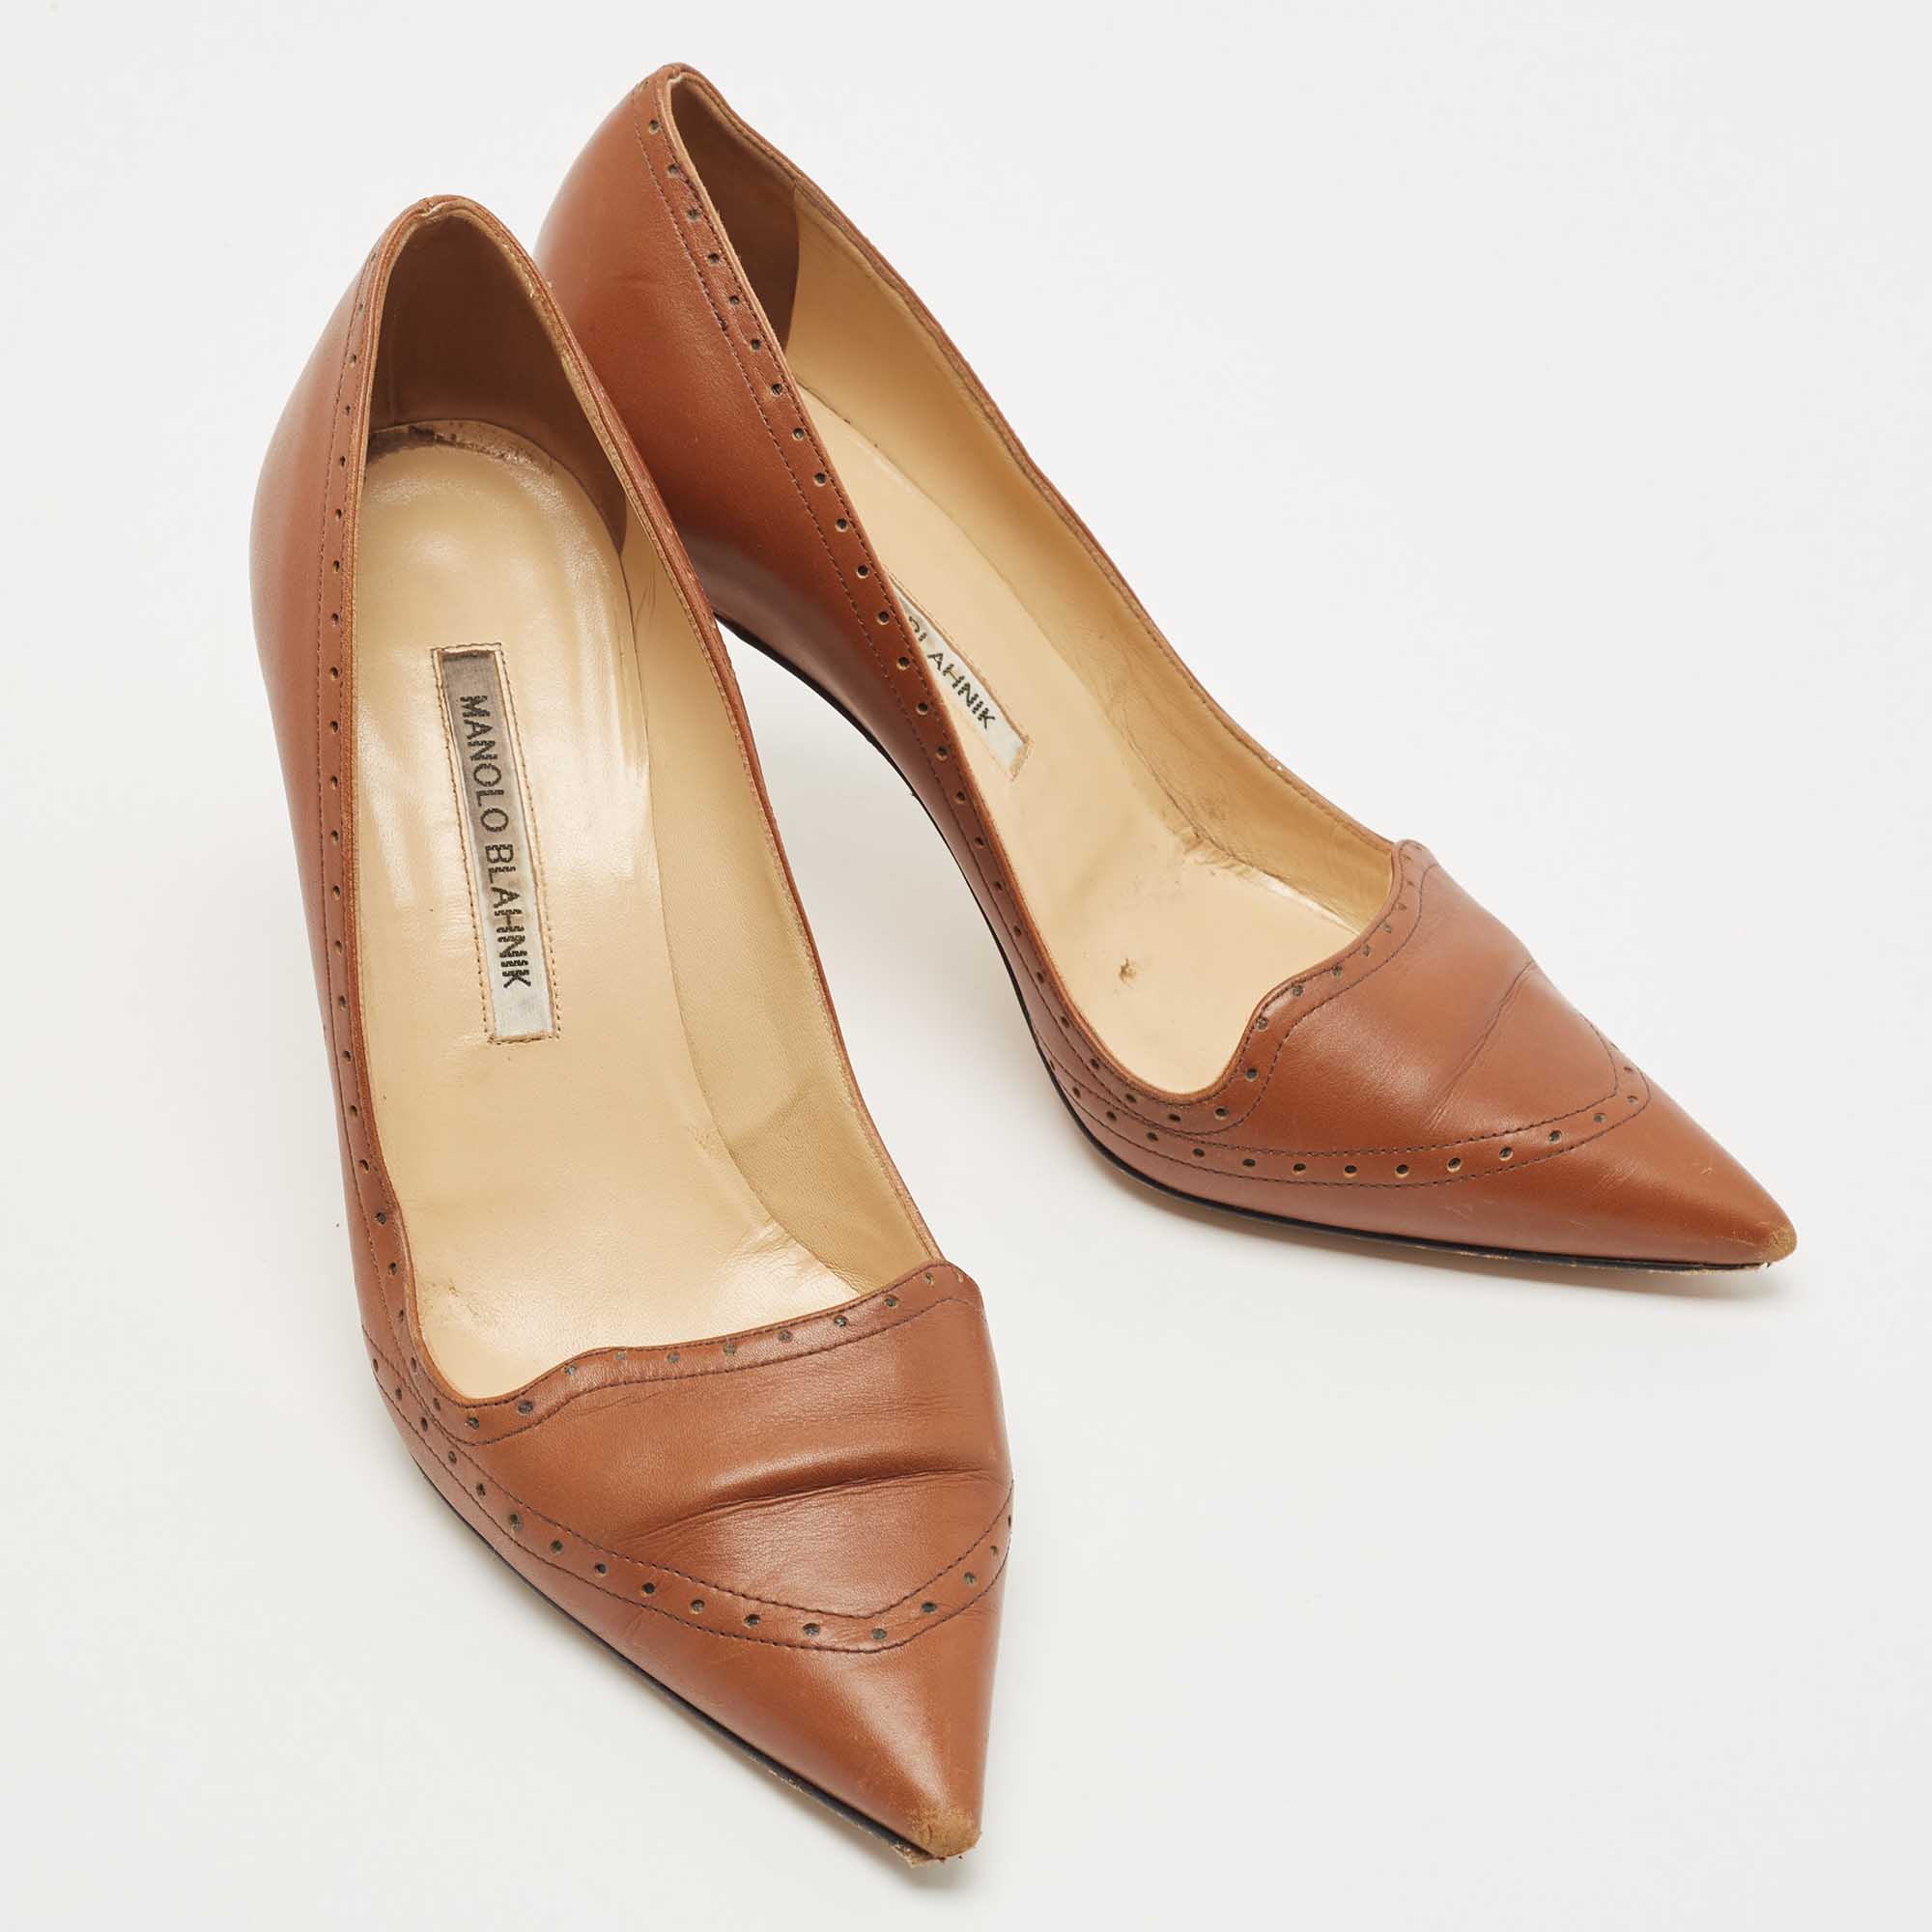 Manolo Blahnik Brown Leather Perforated Pumps Size 39